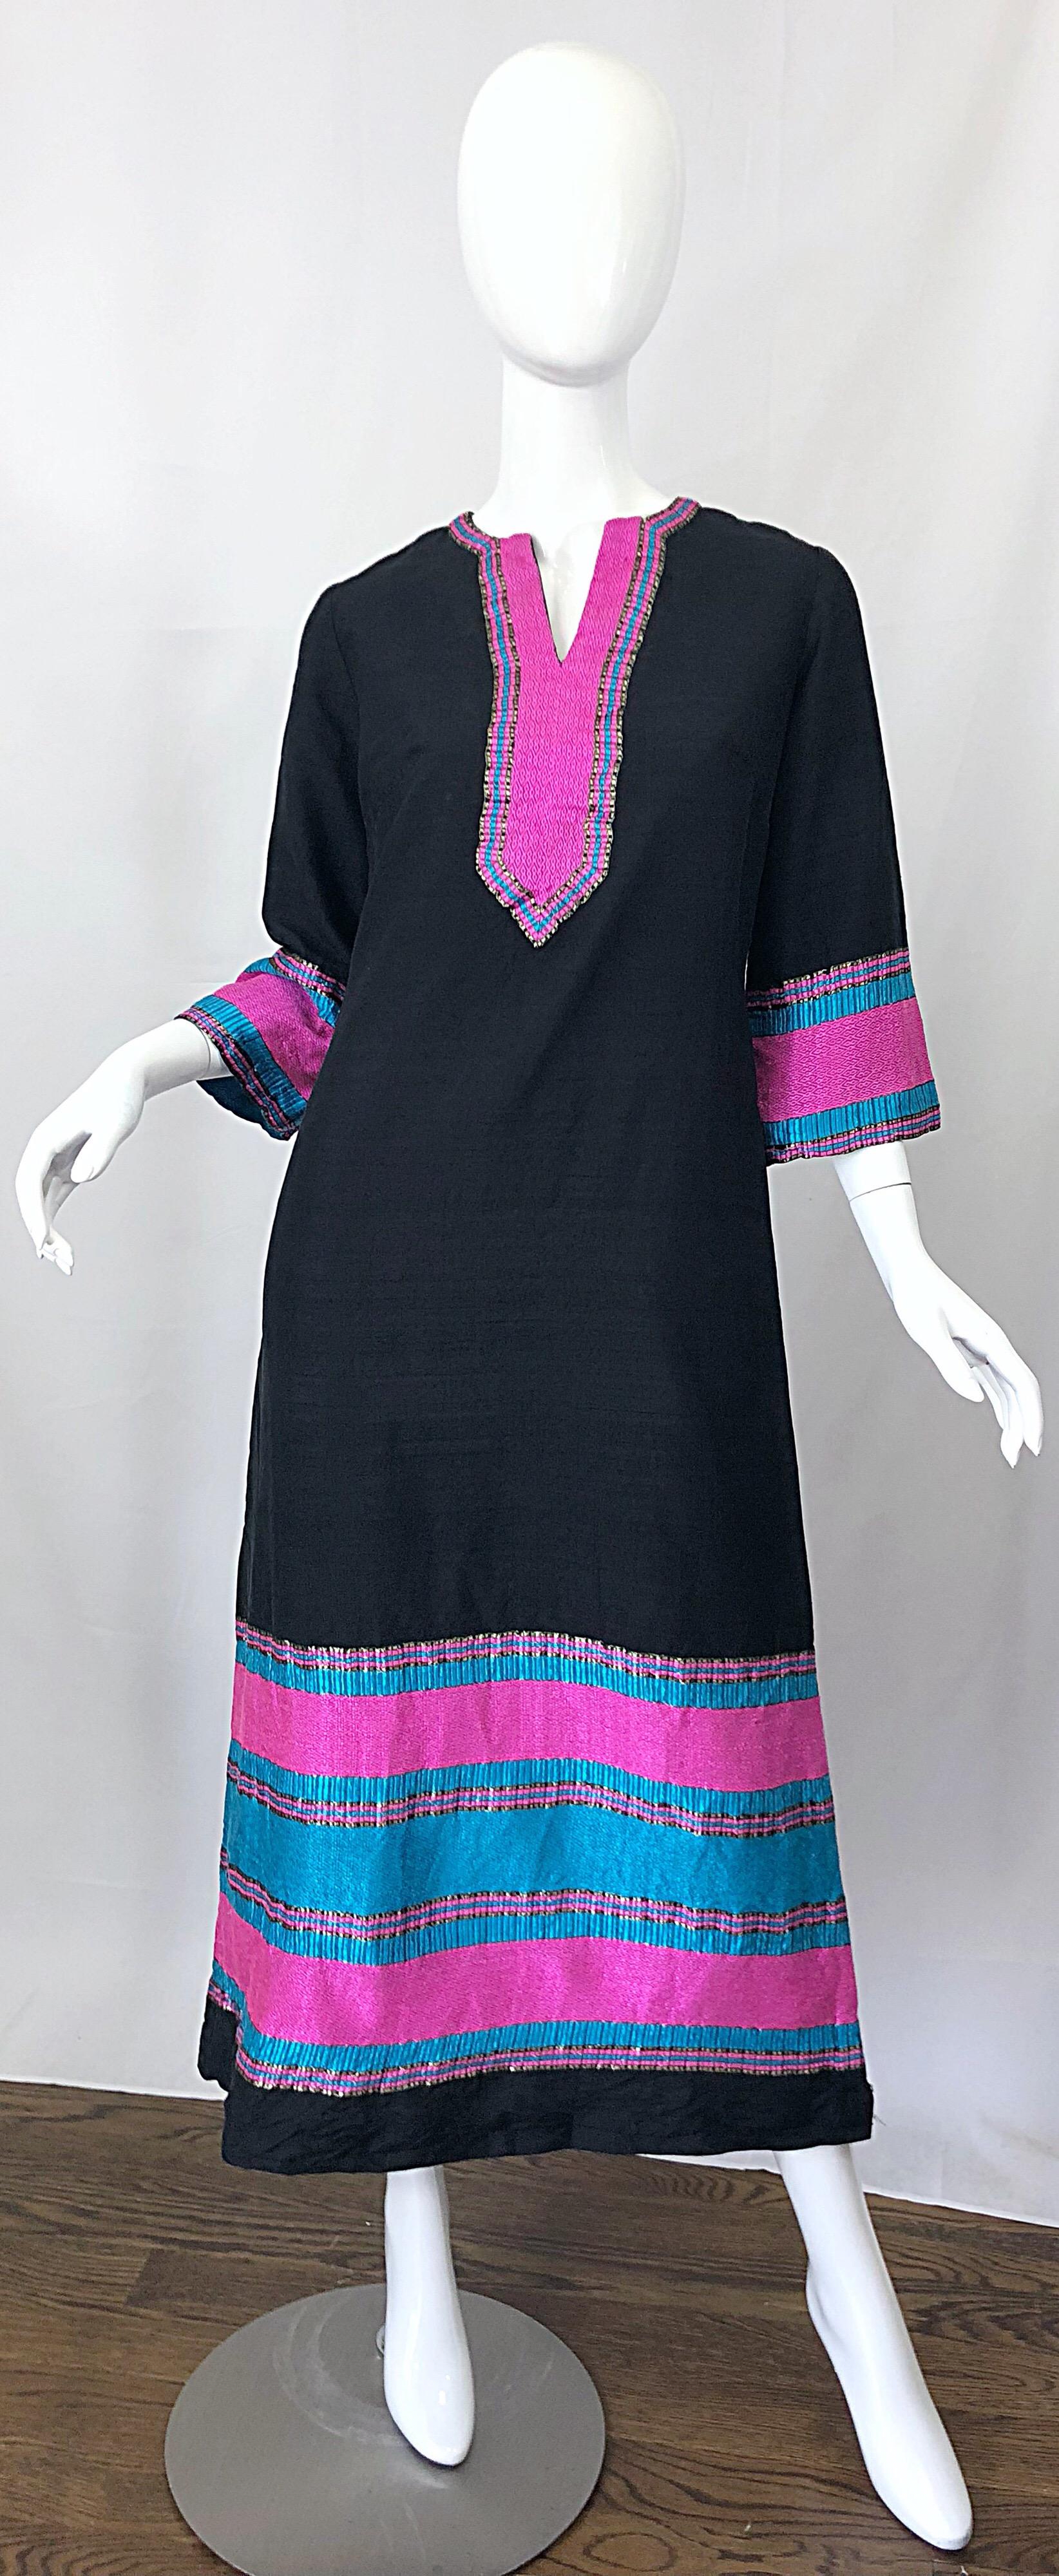 1960s STAR OF SIAM black, pink and turquoise blue Thai silk long sleeve caftan / maxi dress! Vibrant colors with stripes neck, each sleeve and the hem. Chic bell sleeves. Full metal zipper up the back with hook-and-eye closure. Vent at each side of